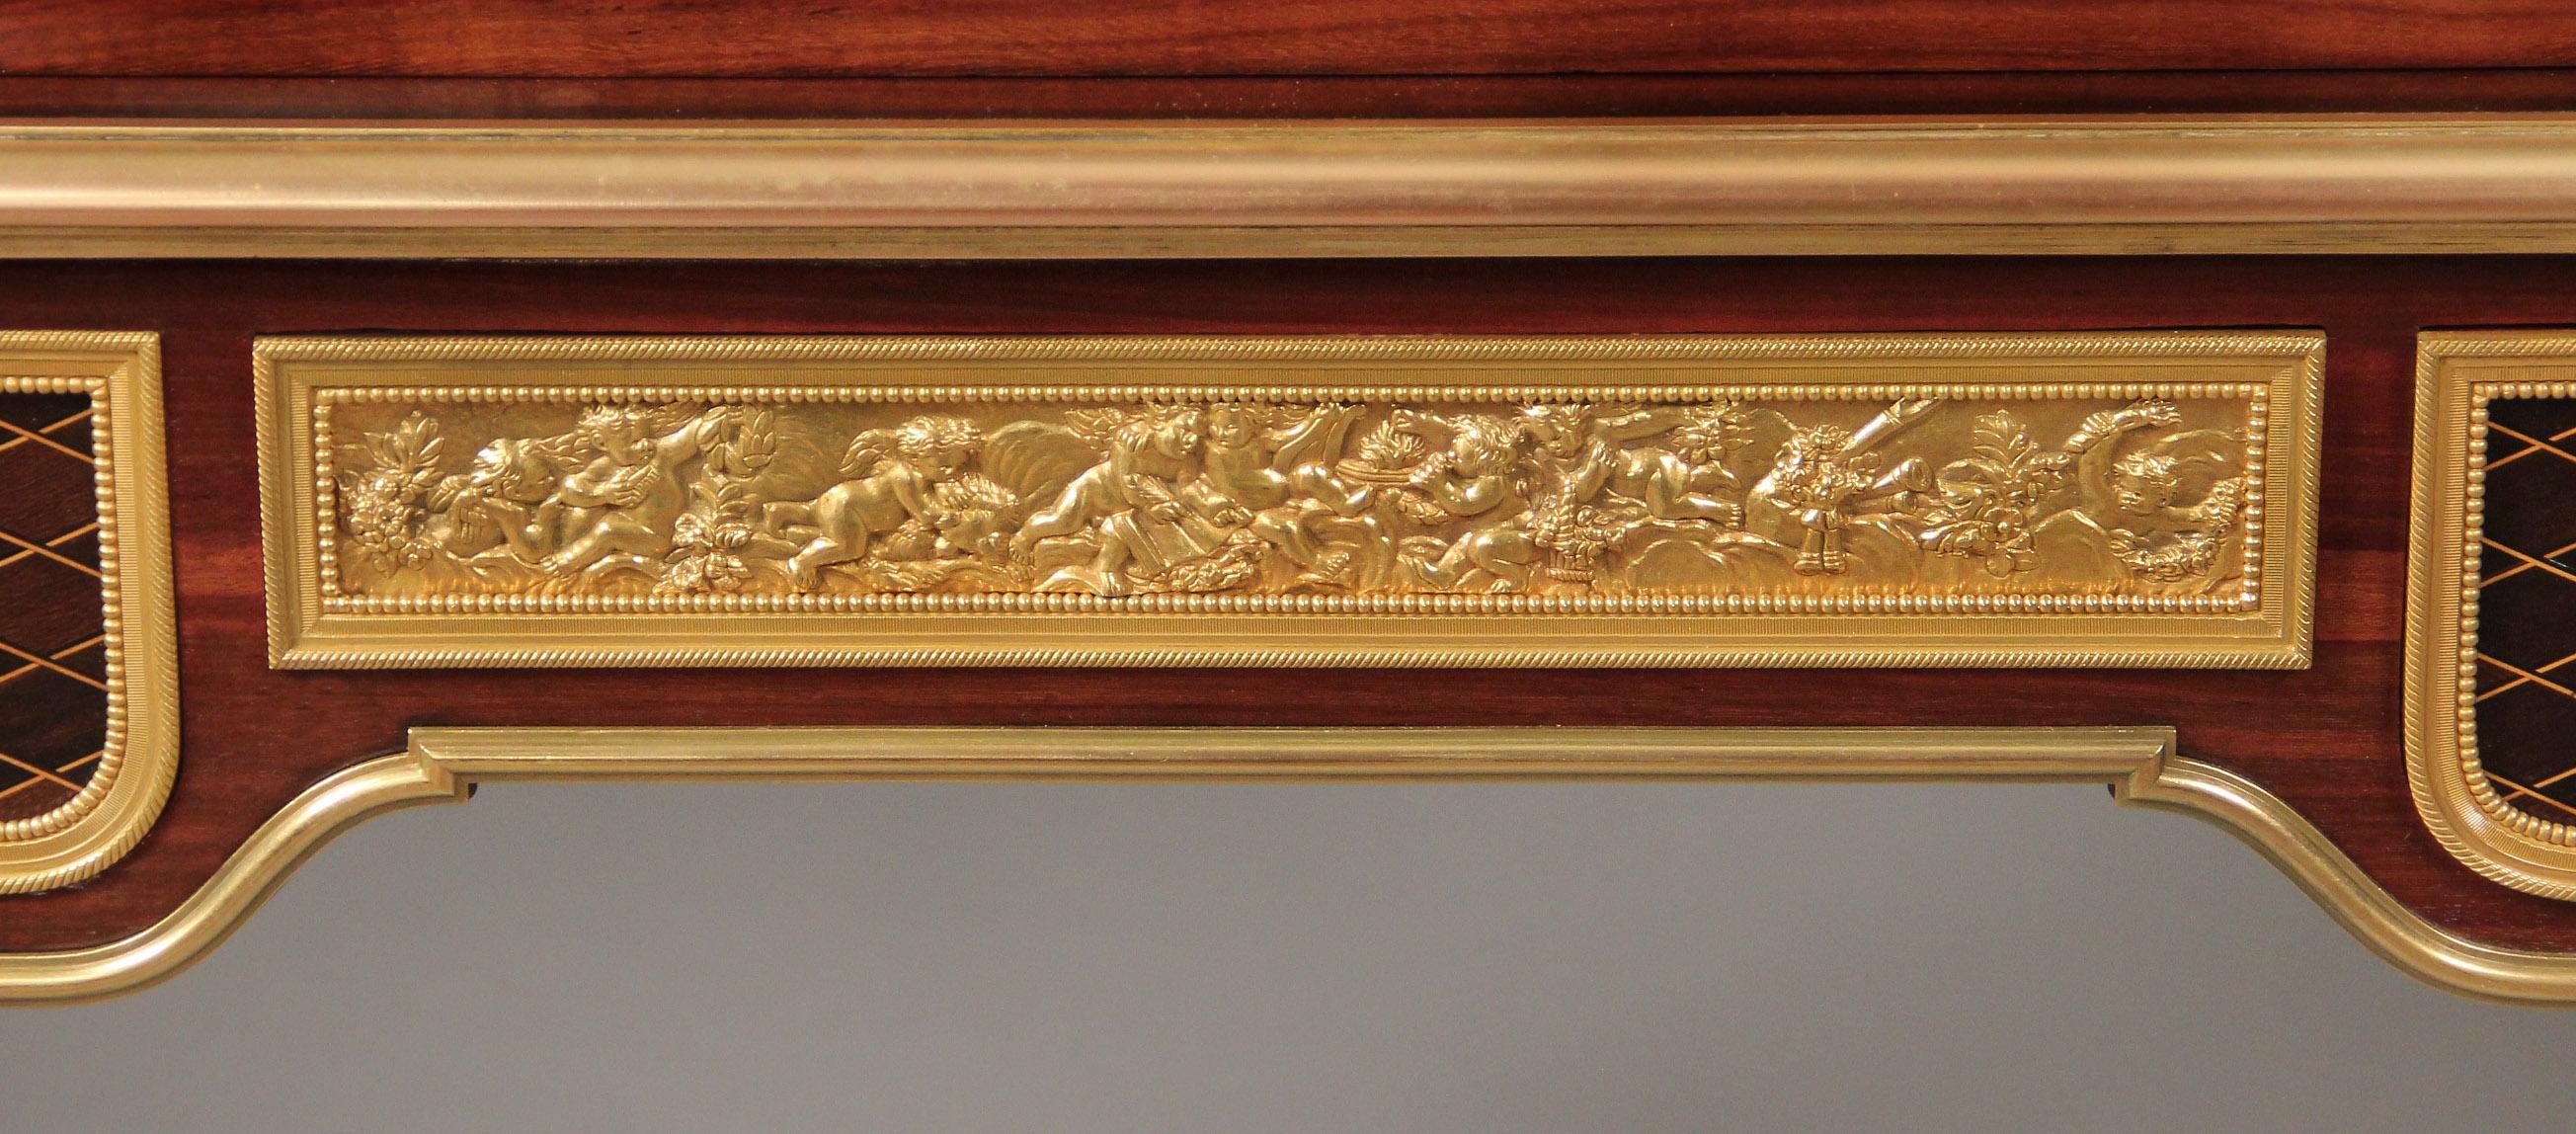 French 19th Century Gilt Bronze Mounted Bureau à Cylindre Possibly by François Linke For Sale